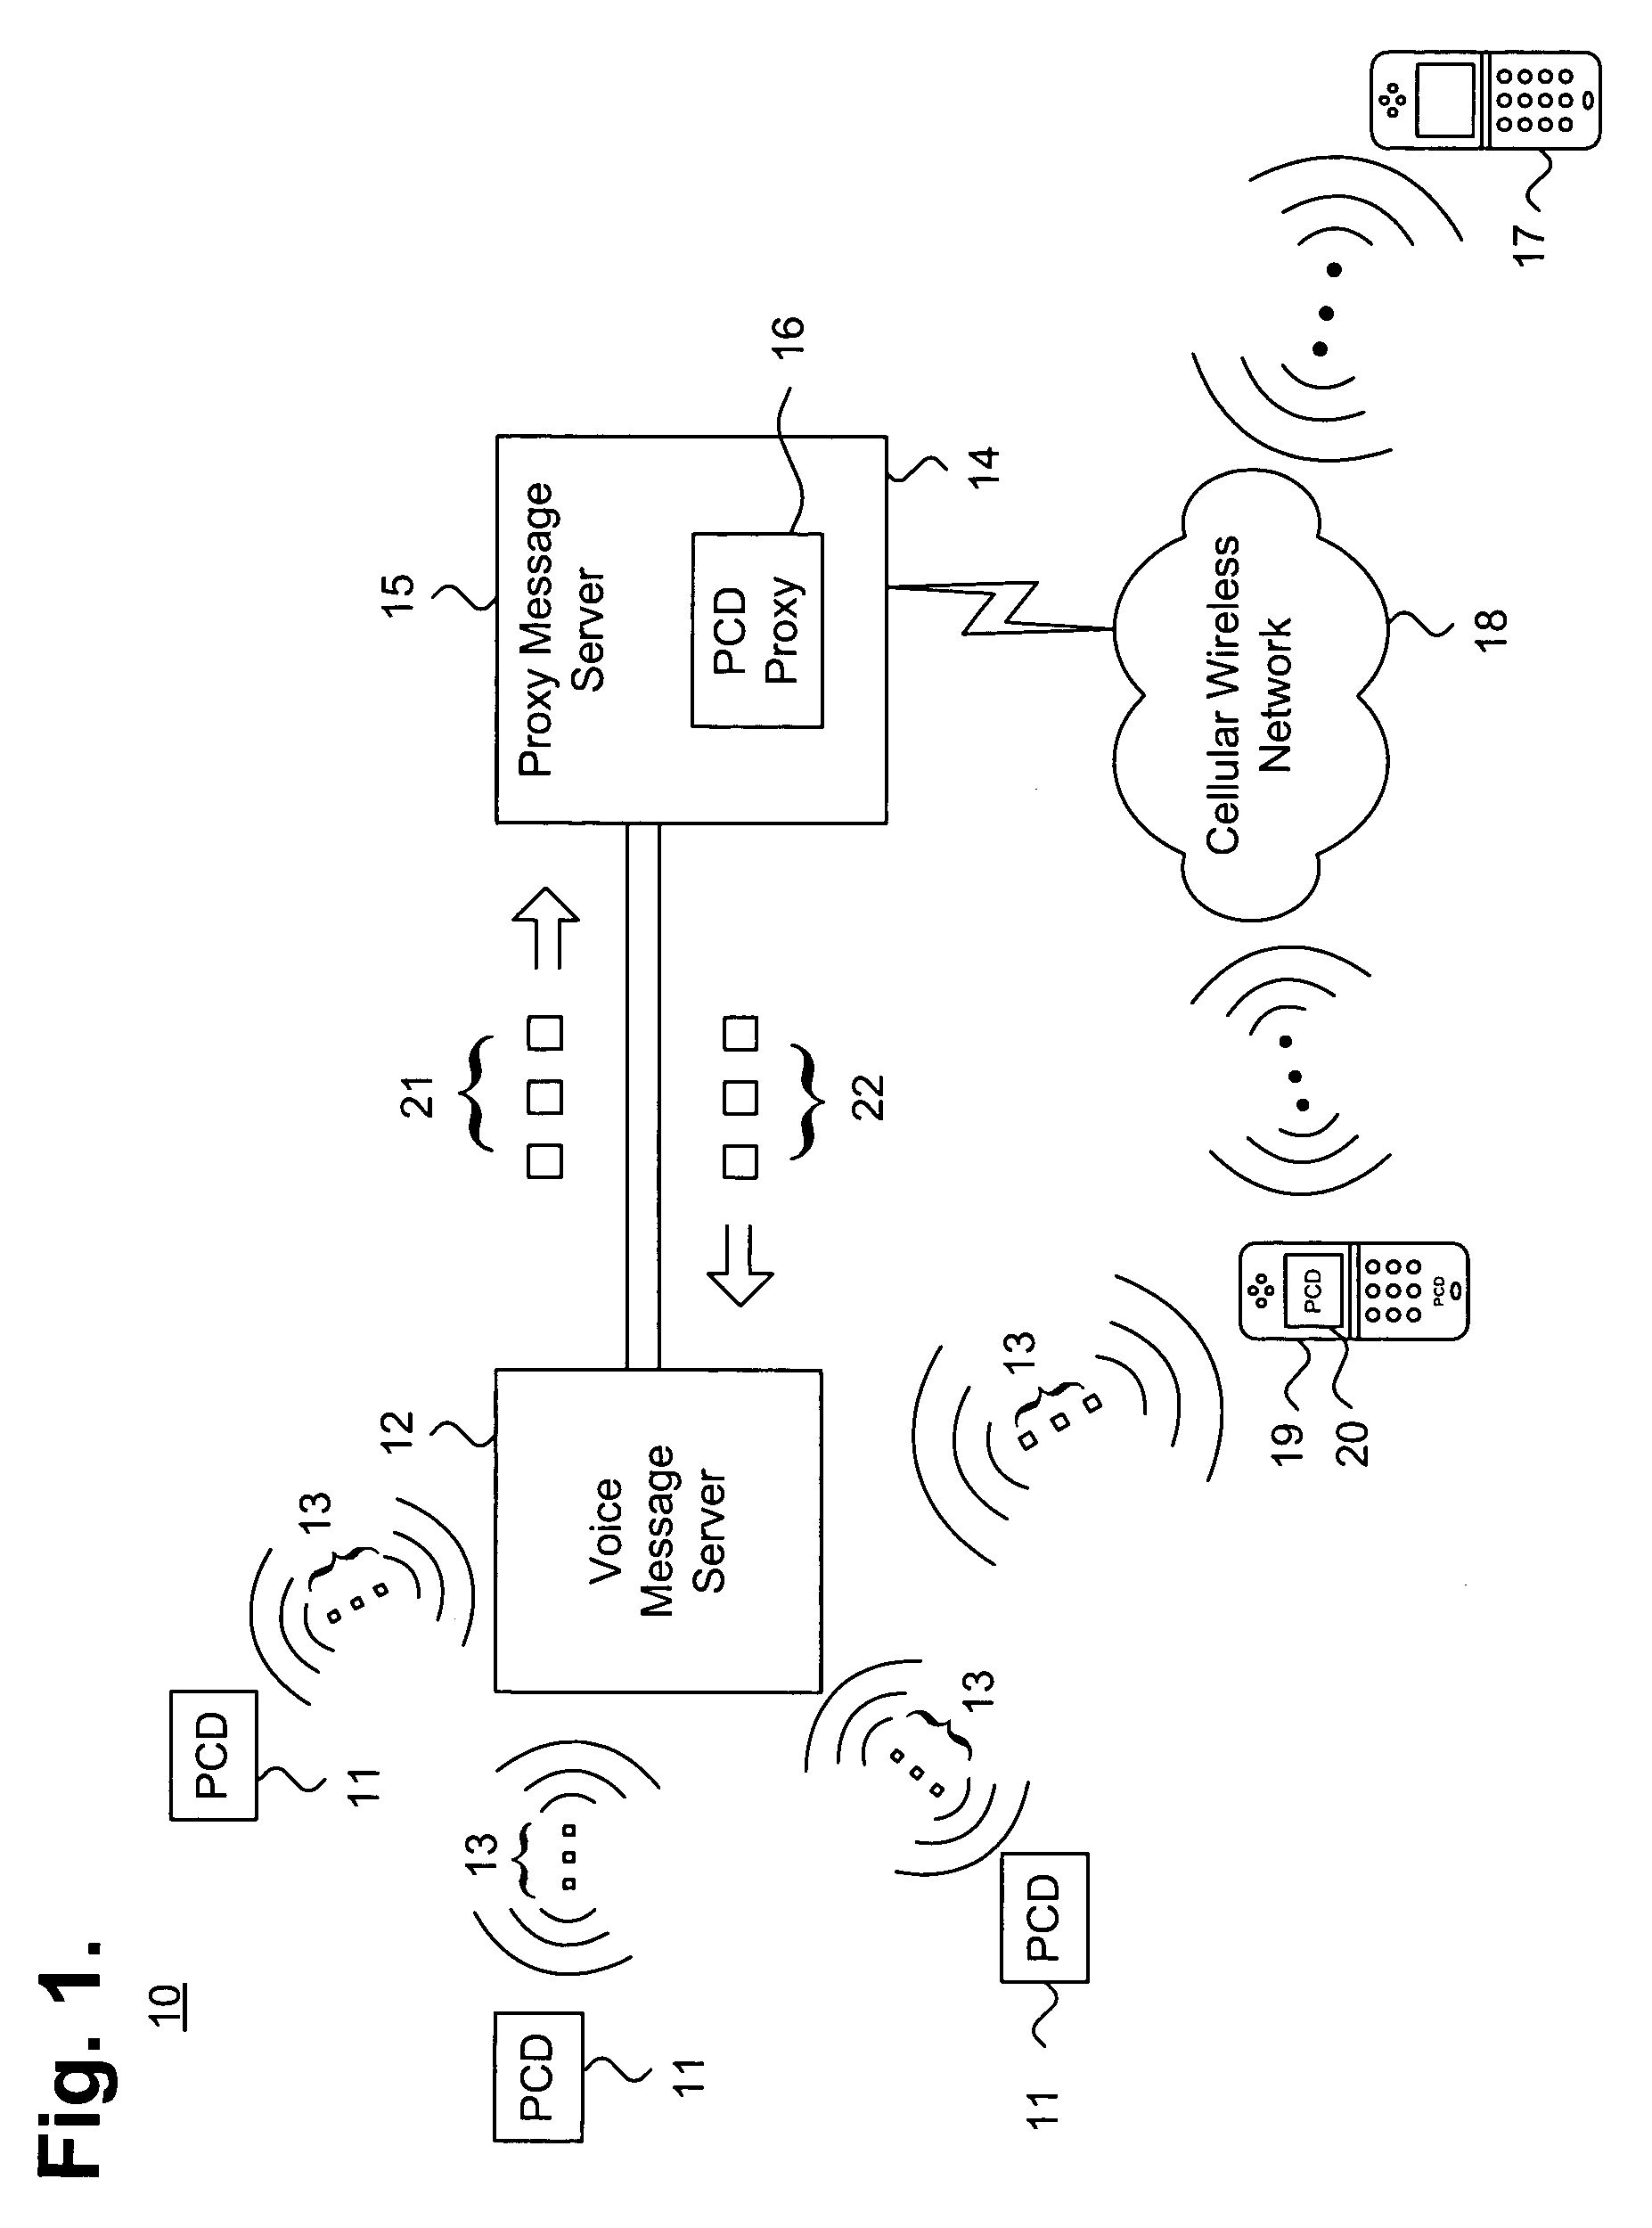 System and method for providing multi-party message-based voice communications